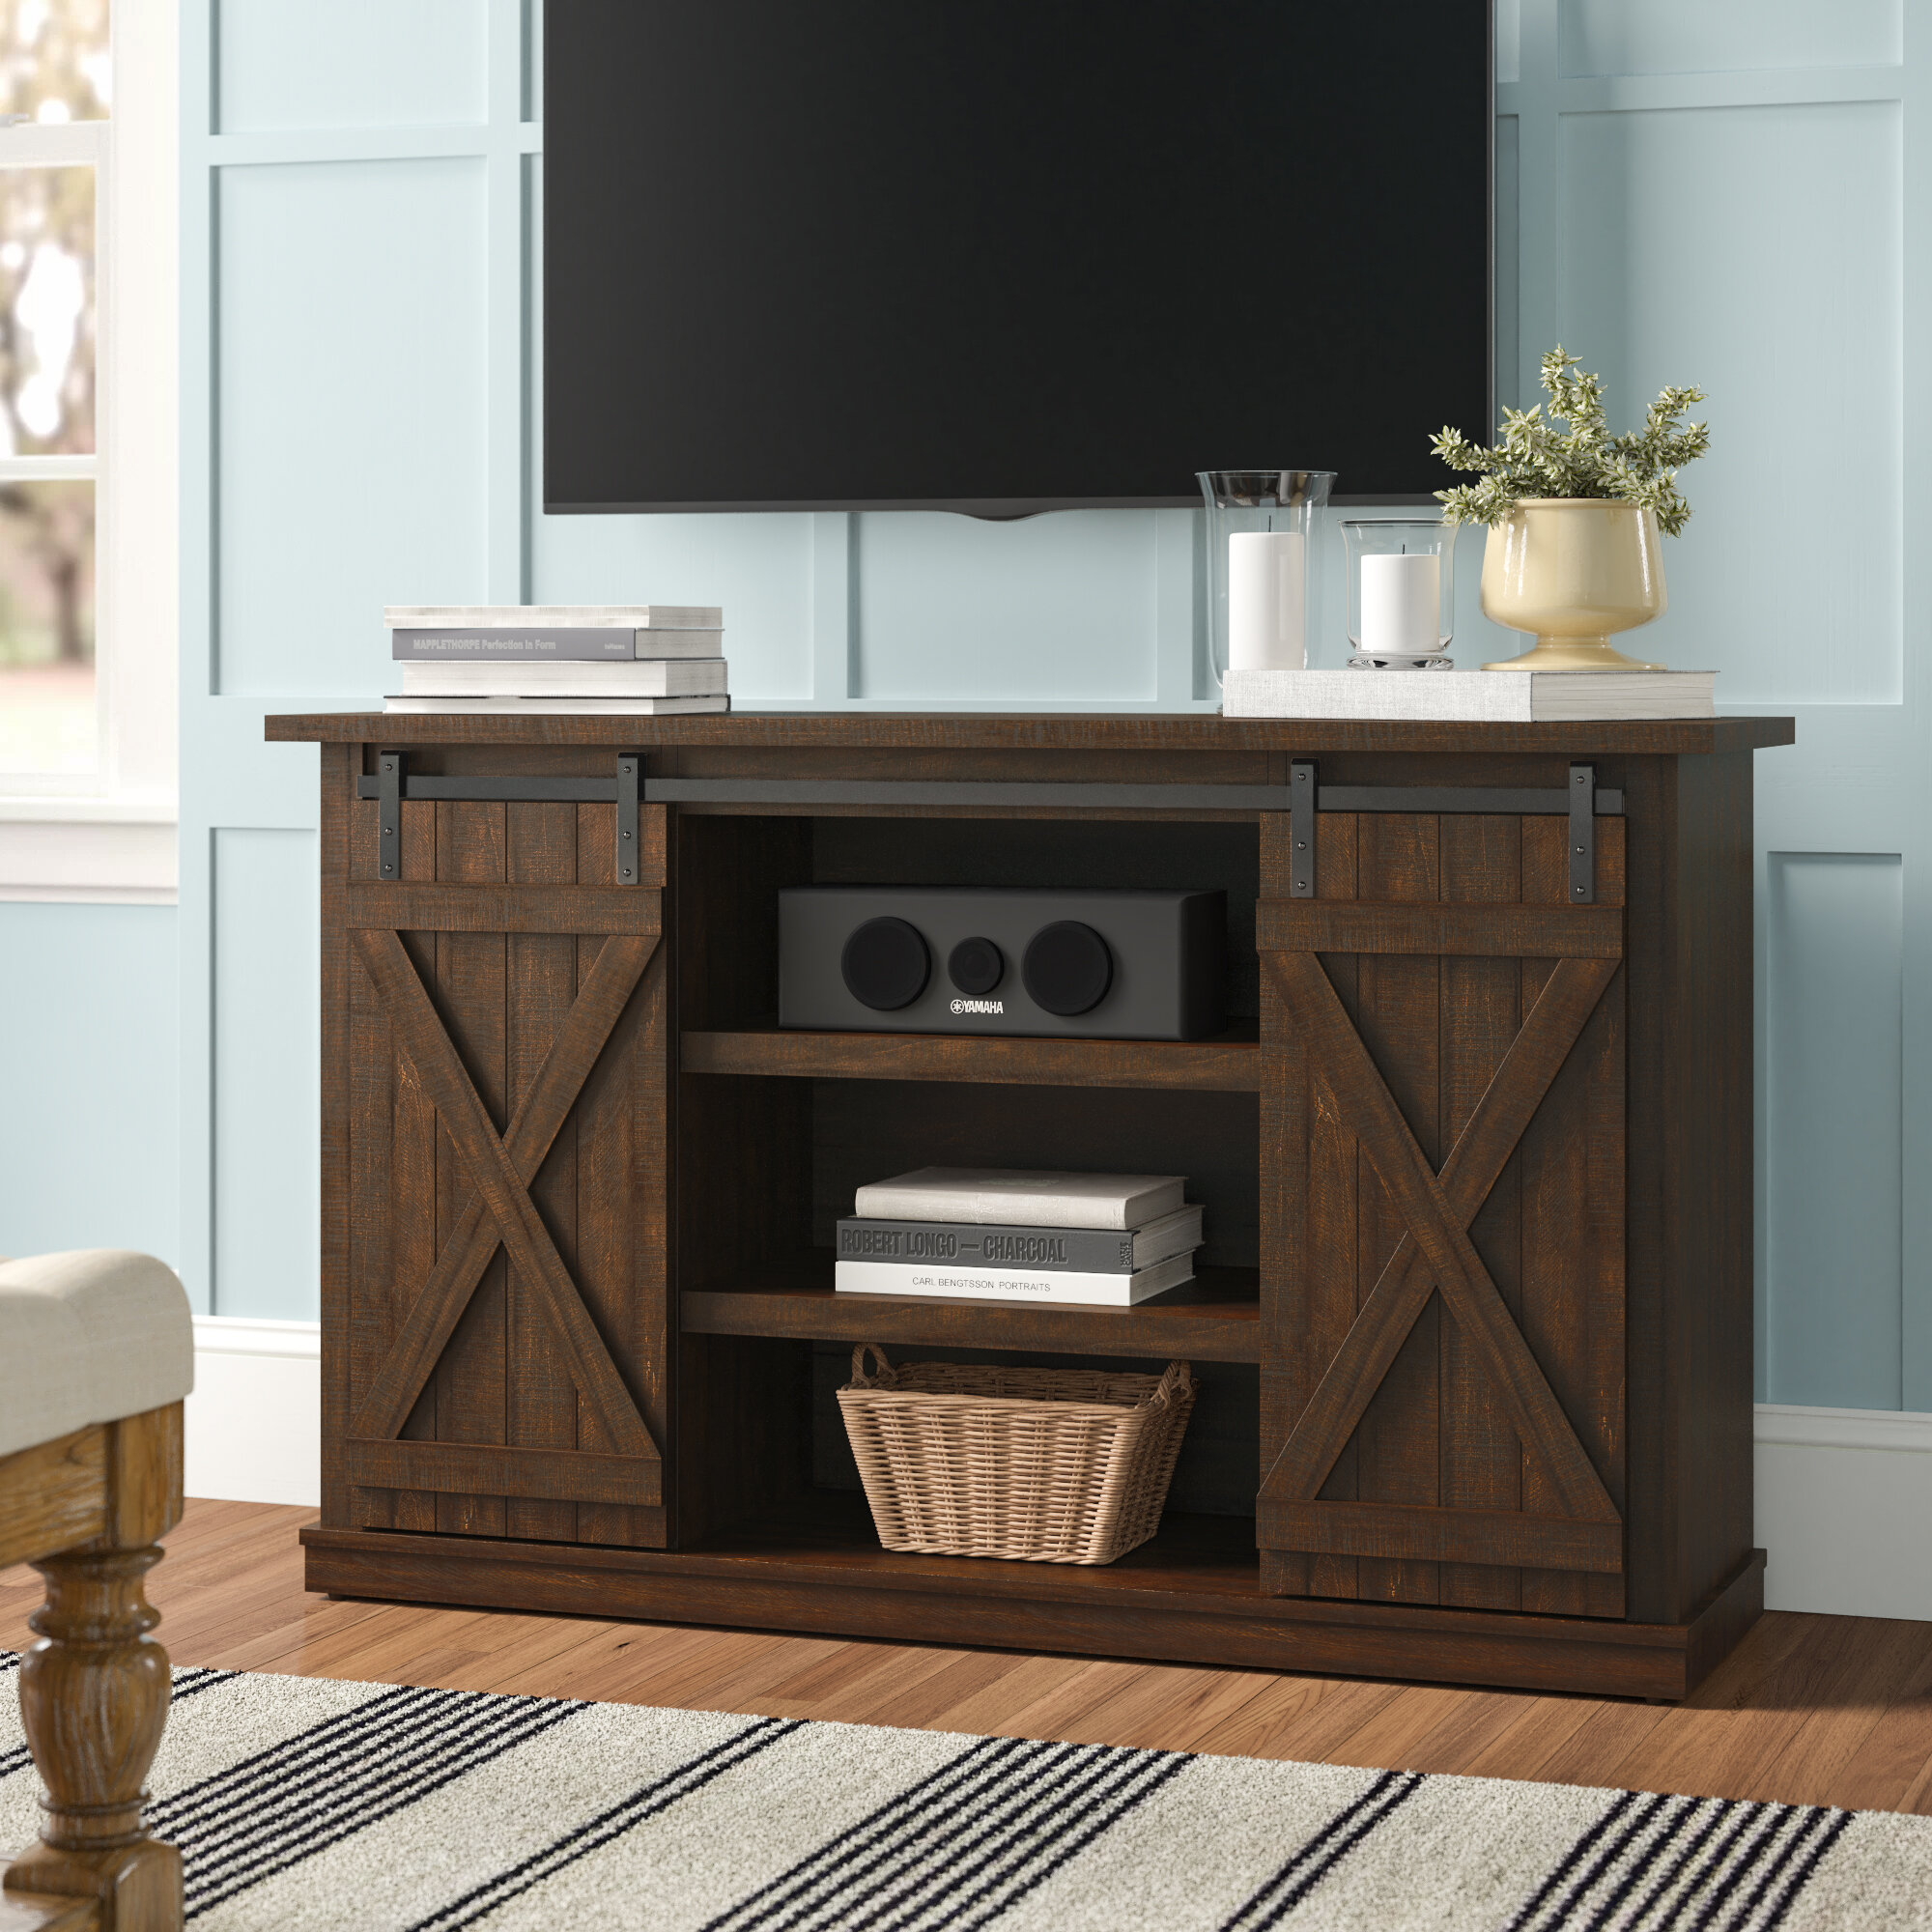 4 Section Wide Wooden TV Stand Furniture Unit Living Room Storage Media Cables 